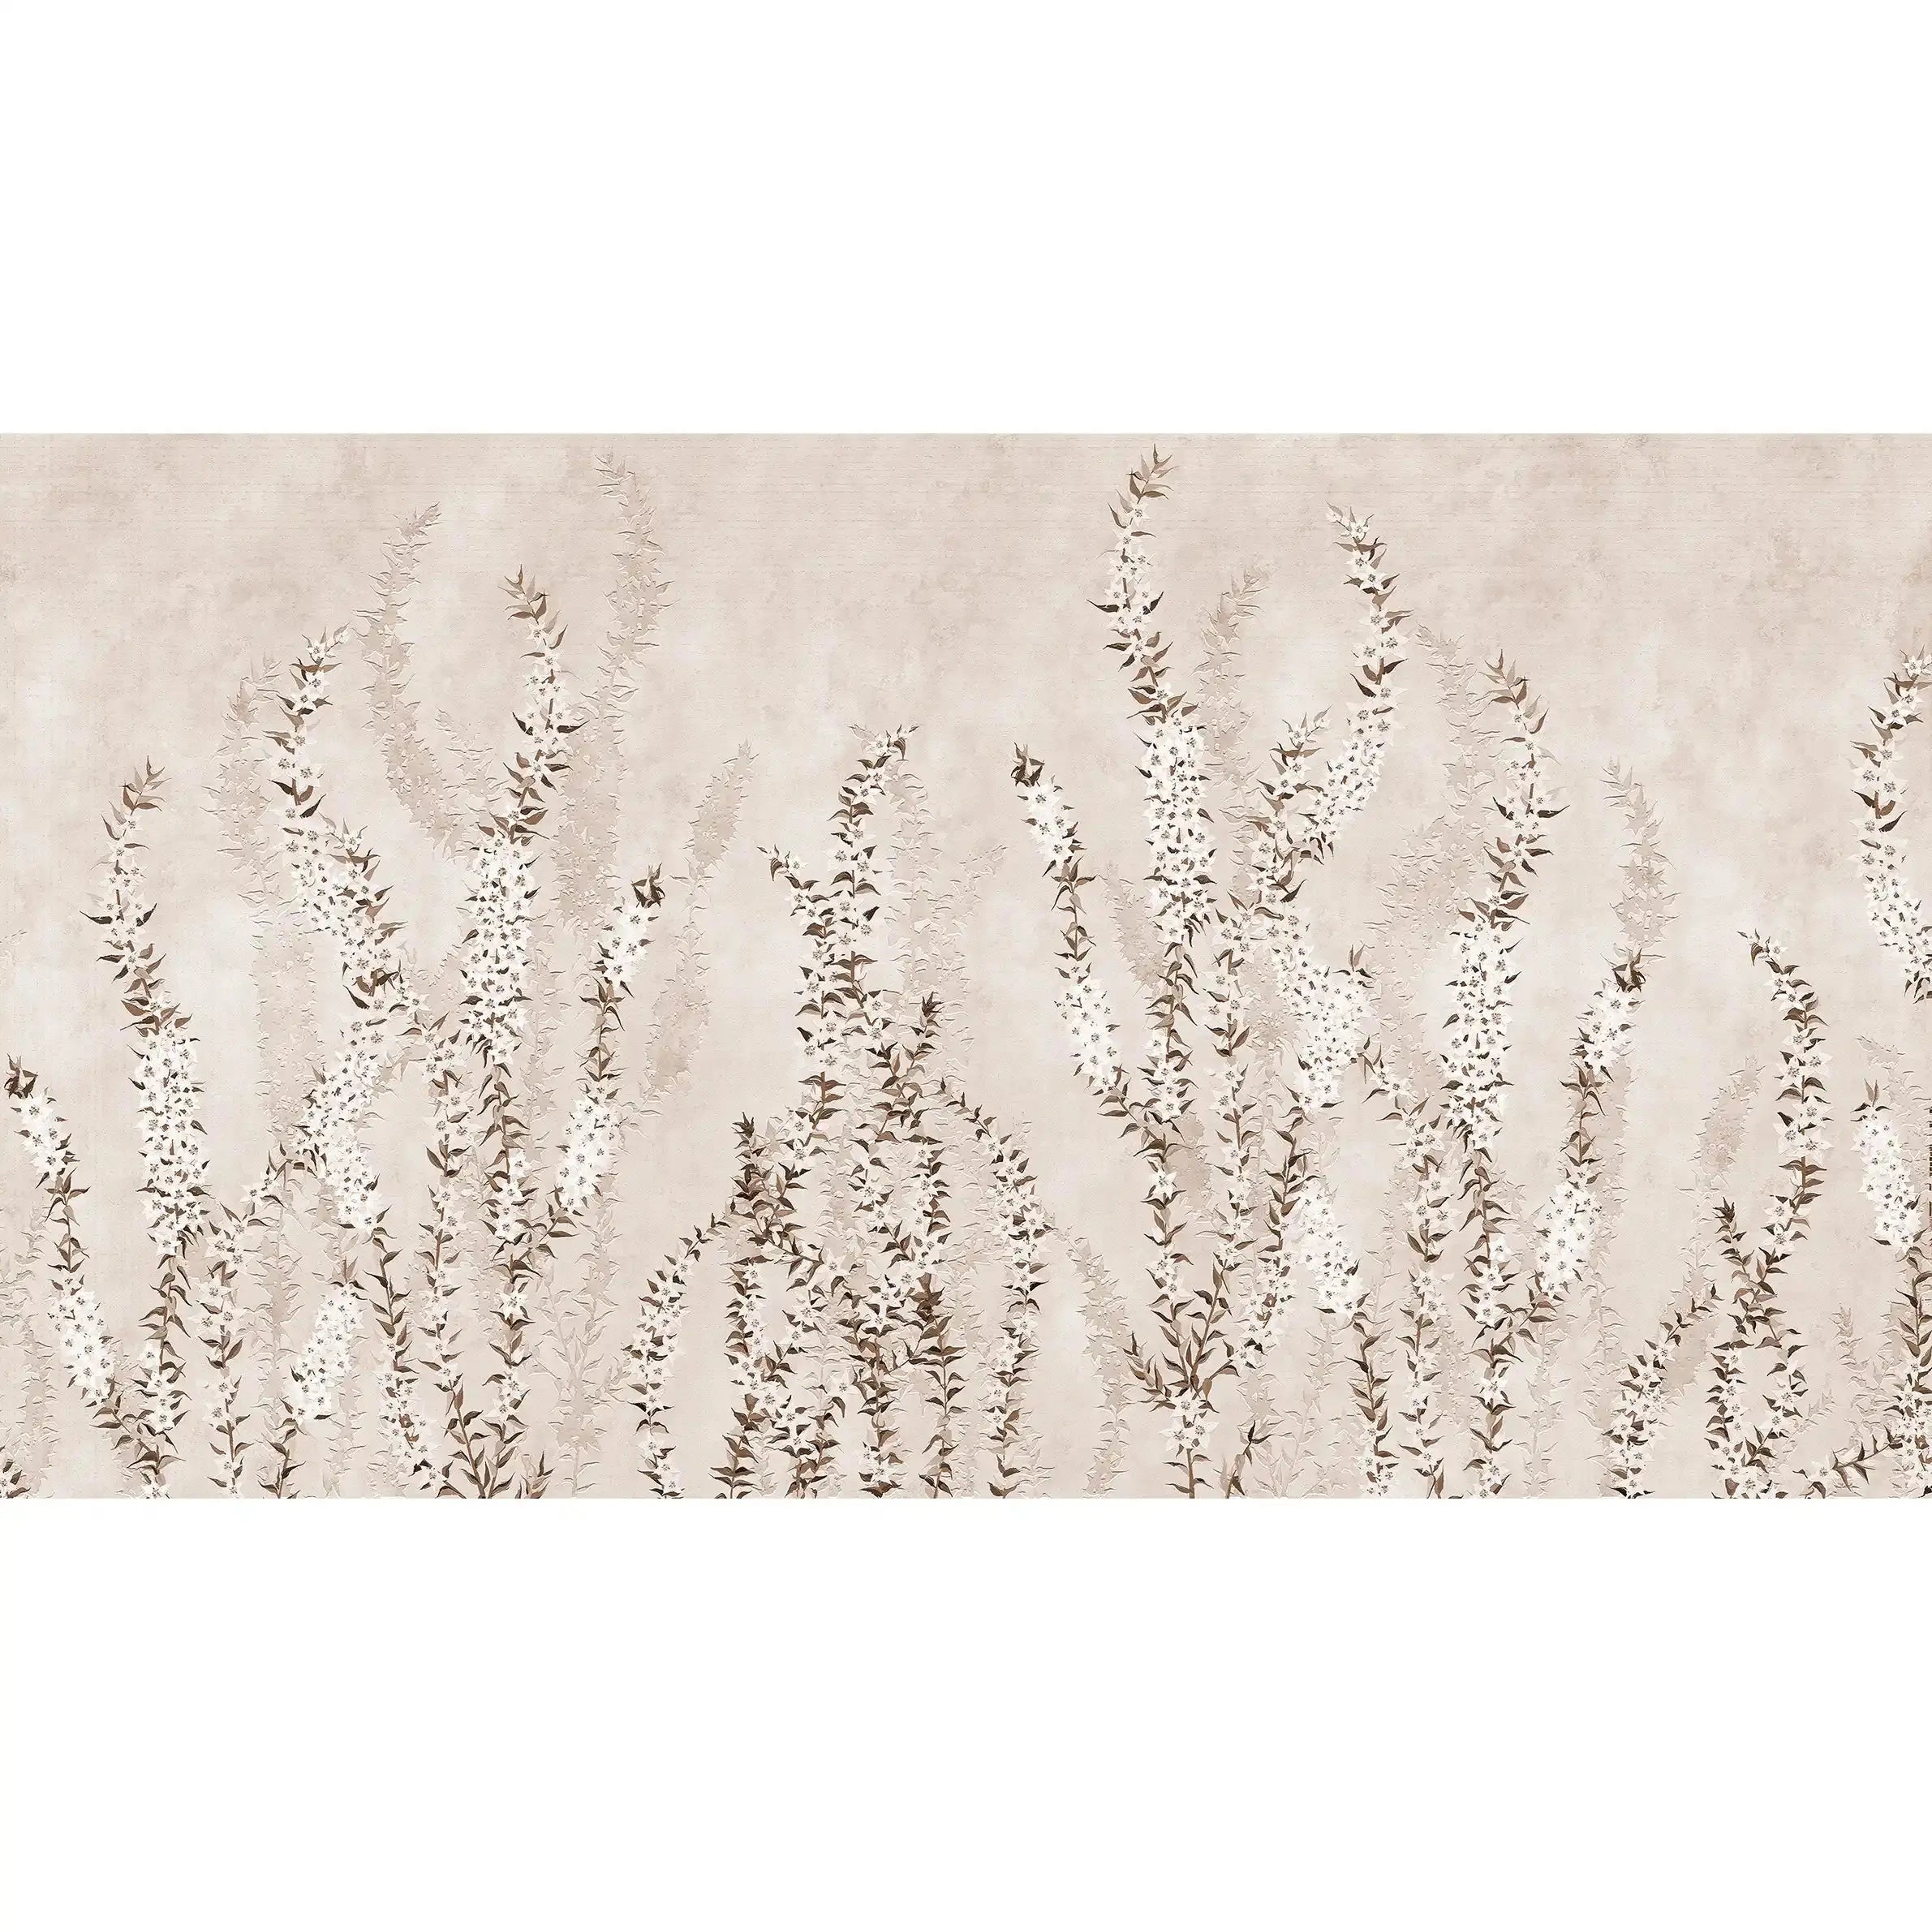 3023-A / Modern Beige Paisley Wallpaper, Adhesive Peel and Stick, Temporary Wallpaper for Home Decor - Artevella